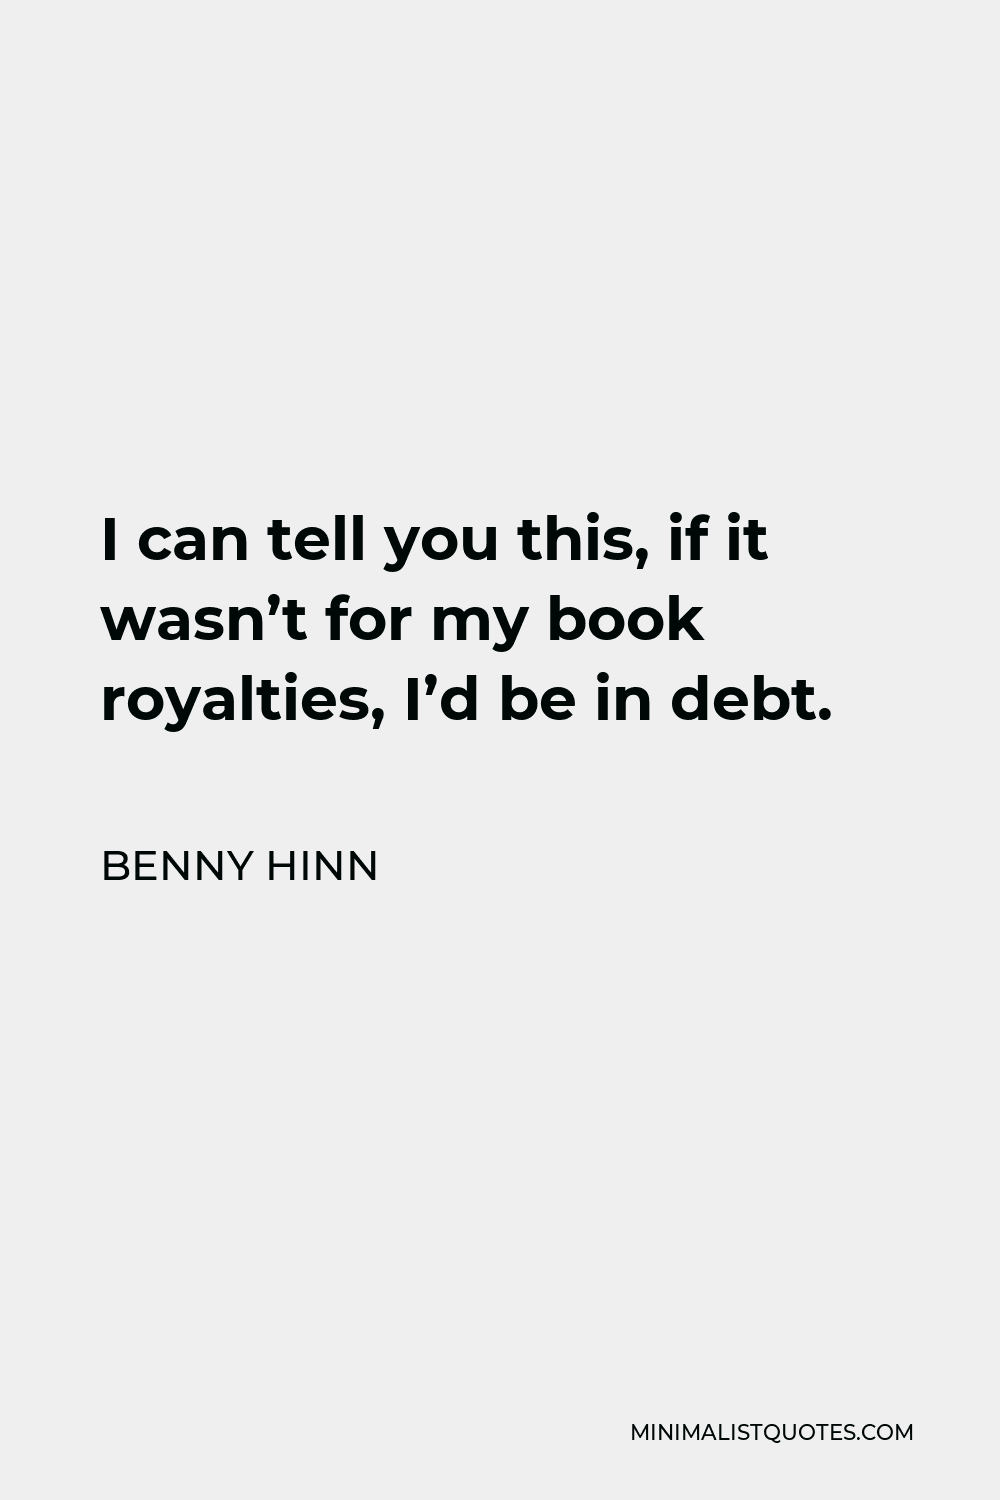 Benny Hinn Quote - I can tell you this, if it wasn’t for my book royalties, I’d be in debt.